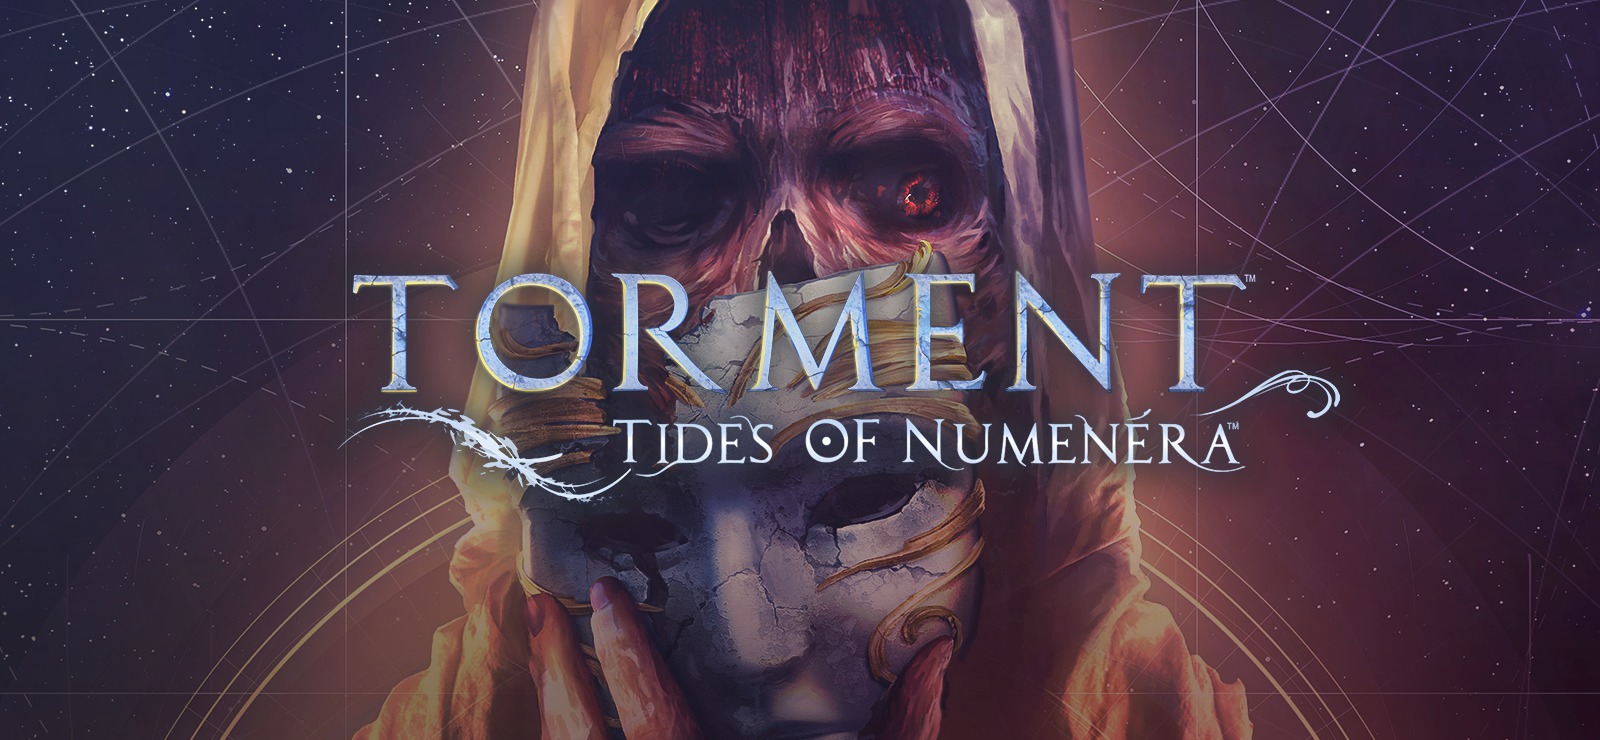 Nice Images Collection: Torment: Tides Of Numenera Desktop Wallpapers